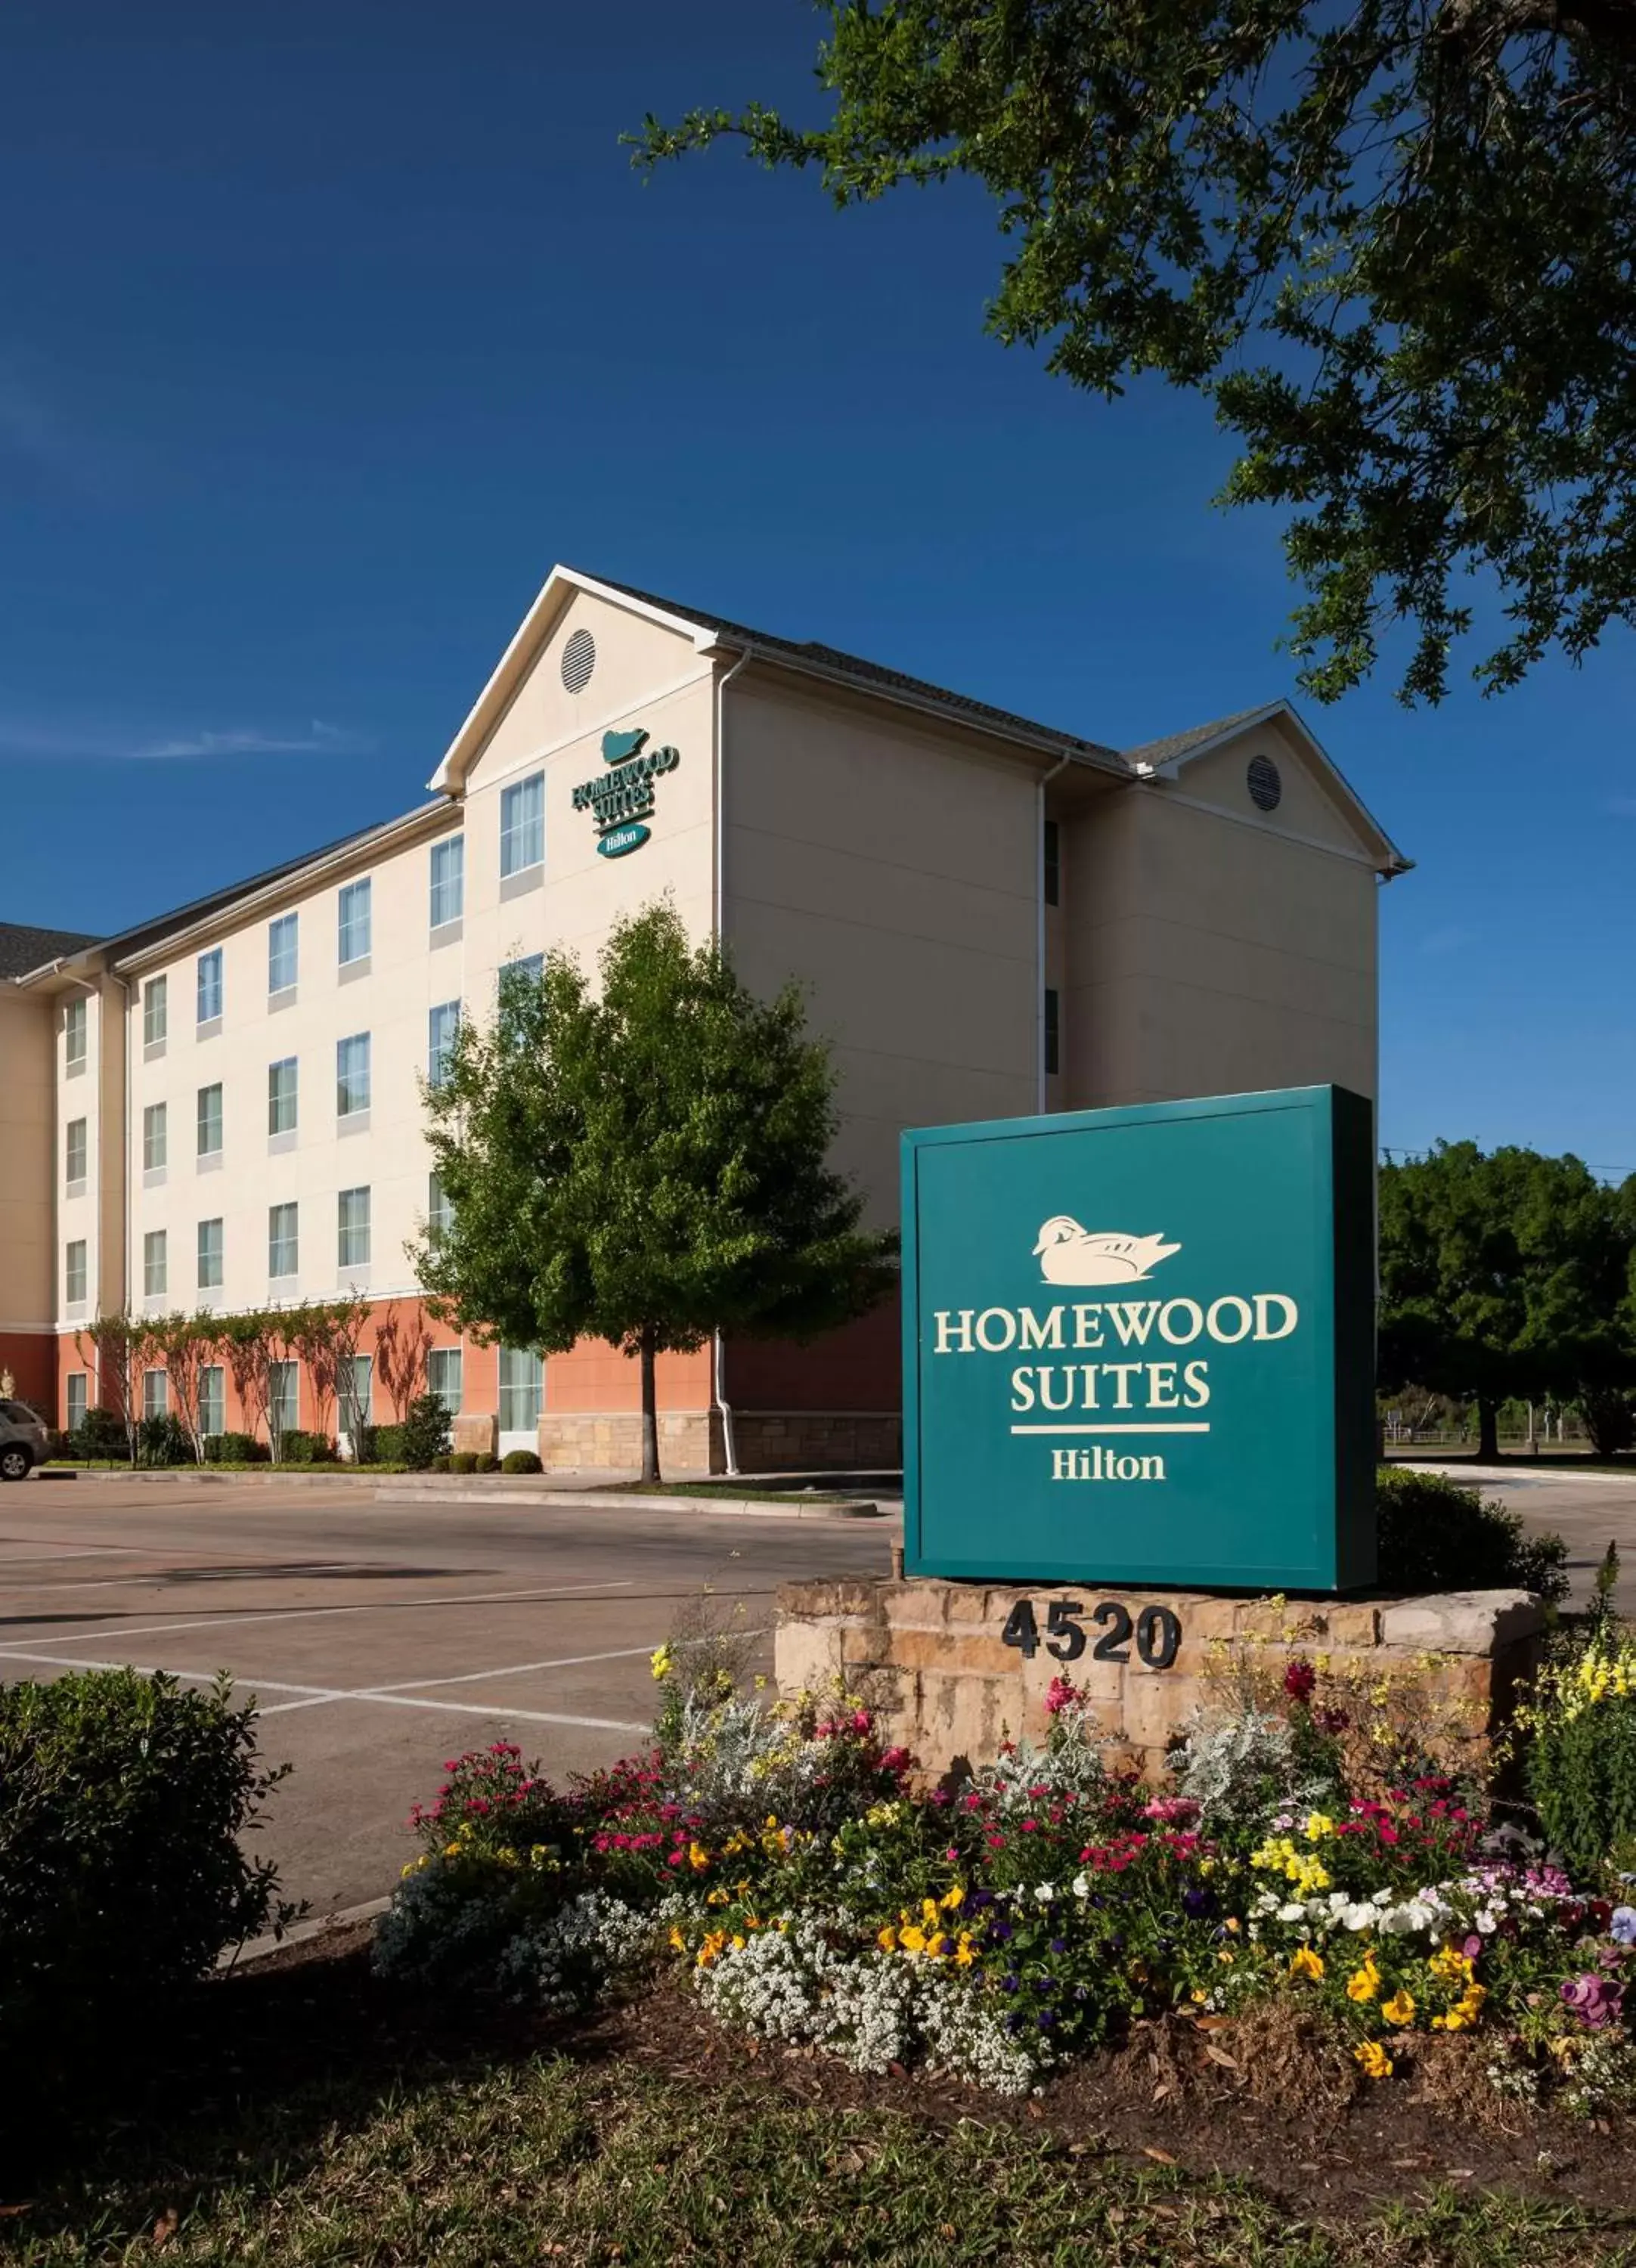 Property Building in Homewood Suites by Hilton Houston Stafford Sugar Land